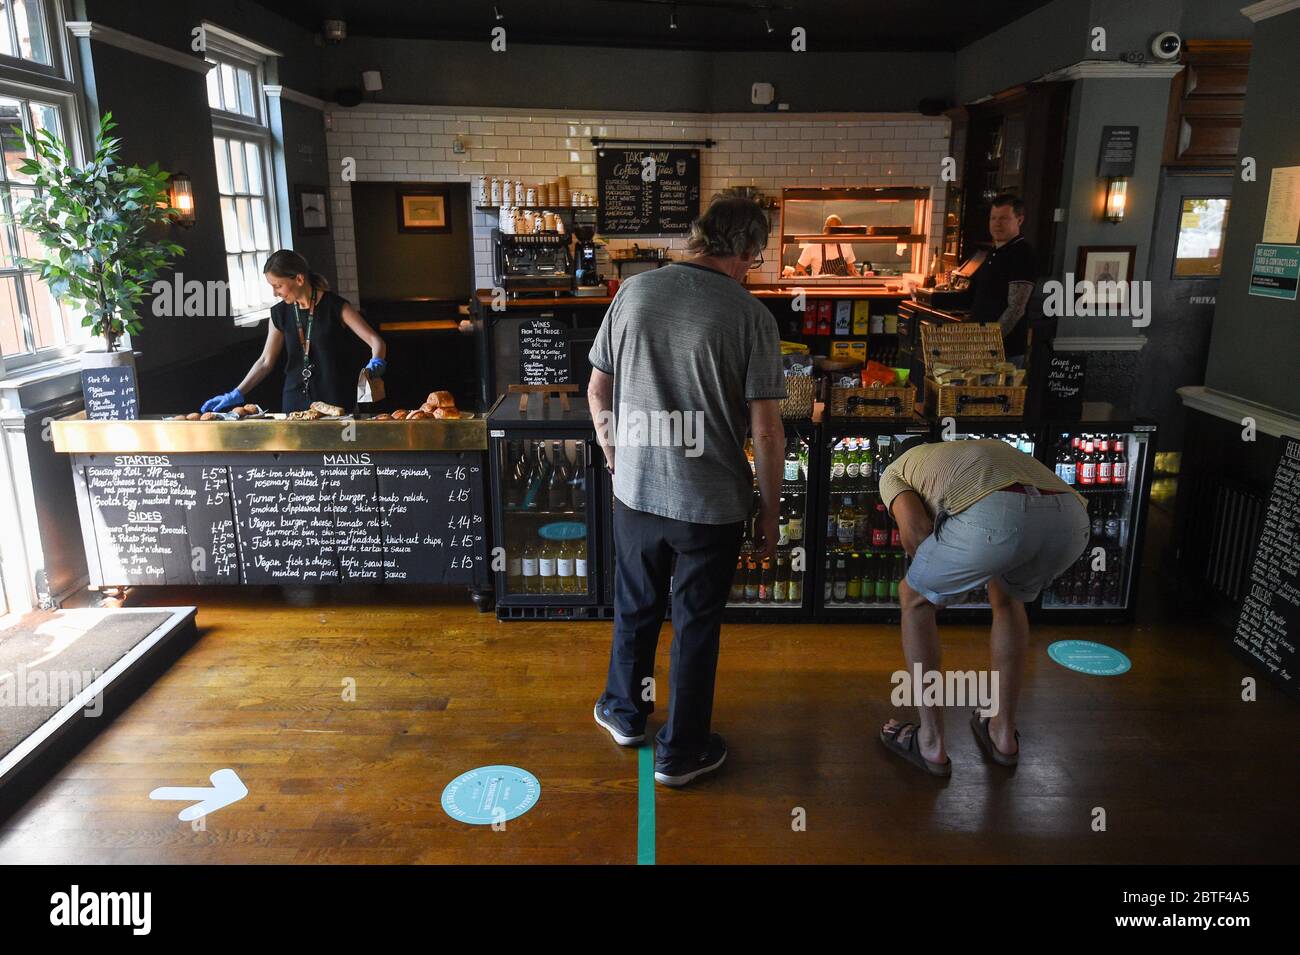 Customers use a one way system at The Crabtree pub in Fulham, London, which offers take away roast dinners after the introduction of measures to bring the country out of lockdown. Stock Photo